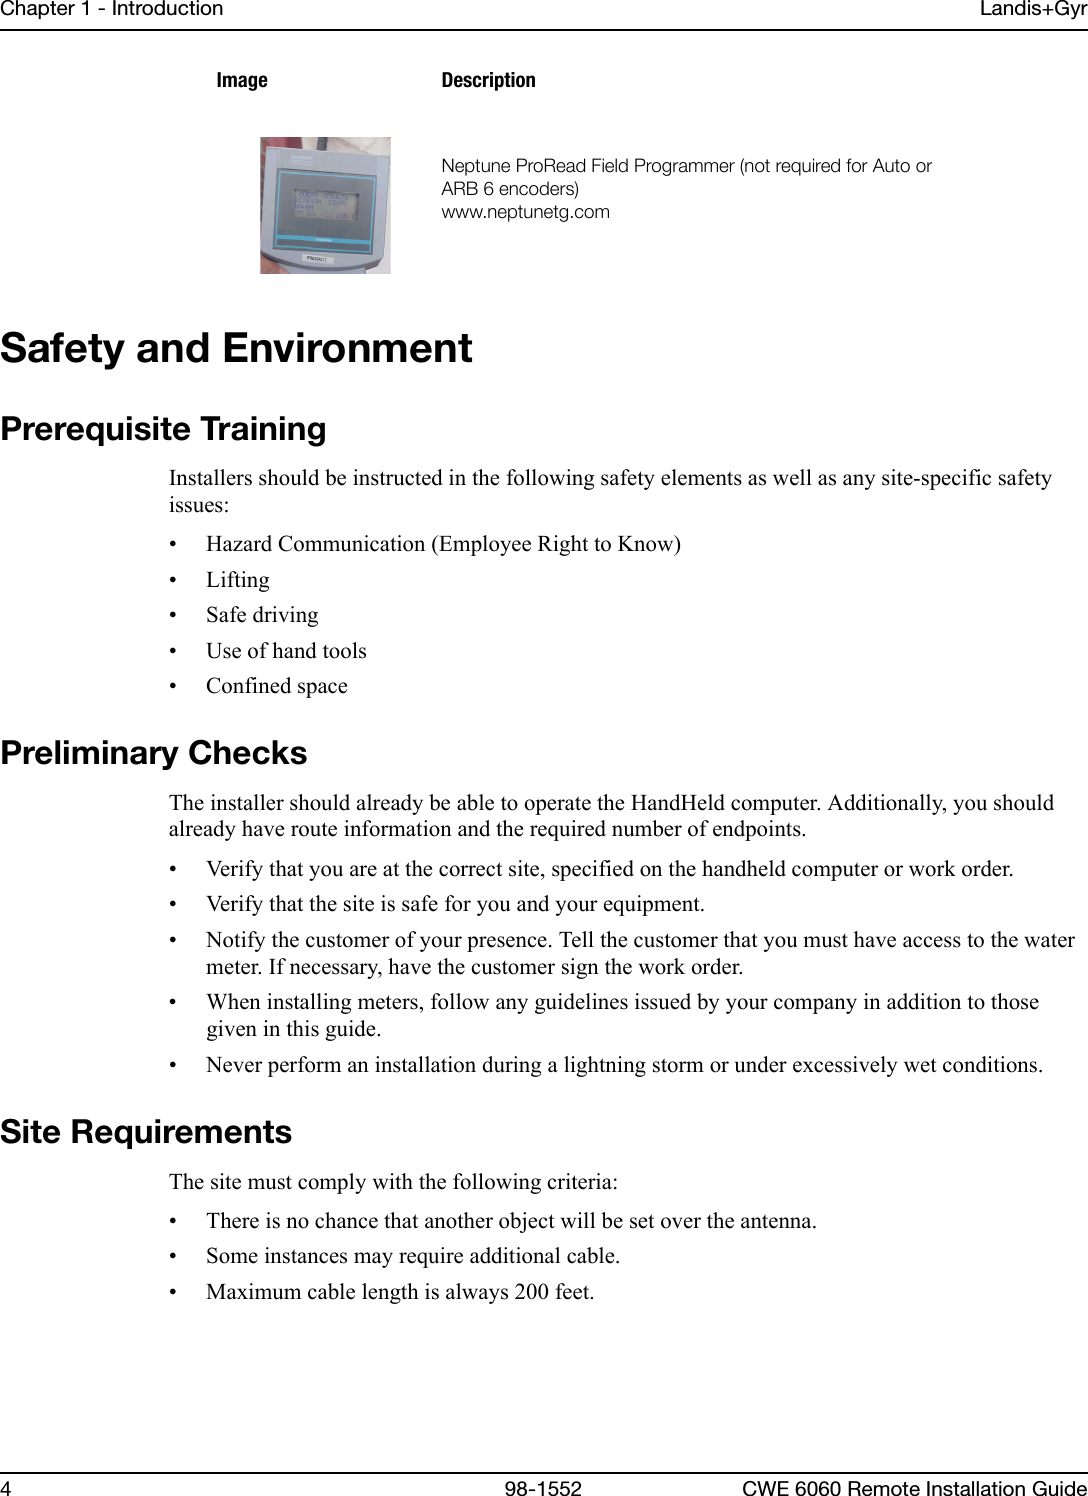 Chapter 1 - Introduction Landis+Gyr4 98-1552 CWE 6060 Remote Installation GuideSafety and EnvironmentPrerequisite TrainingInstallers should be instructed in the following safety elements as well as any site-specific safety issues:• Hazard Communication (Employee Right to Know)• Lifting• Safe driving• Use of hand tools• Confined spacePreliminary ChecksThe installer should already be able to operate the HandHeld computer. Additionally, you should already have route information and the required number of endpoints.• Verify that you are at the correct site, specified on the handheld computer or work order.• Verify that the site is safe for you and your equipment.• Notify the customer of your presence. Tell the customer that you must have access to the water meter. If necessary, have the customer sign the work order.• When installing meters, follow any guidelines issued by your company in addition to those given in this guide.• Never perform an installation during a lightning storm or under excessively wet conditions.Site RequirementsThe site must comply with the following criteria:• There is no chance that another object will be set over the antenna.• Some instances may require additional cable. • Maximum cable length is always 200 feet.kÉéíìåÉ=mêçoÉ~Ç=cáÉäÇ=mêçÖê~ããÉê=Eåçí=êÉèìáêÉÇ=Ñçê=^ìíç=çê=^o_=S=ÉåÅçÇÉêëFïïïKåÉéíìåÉíÖKÅçãImage Description